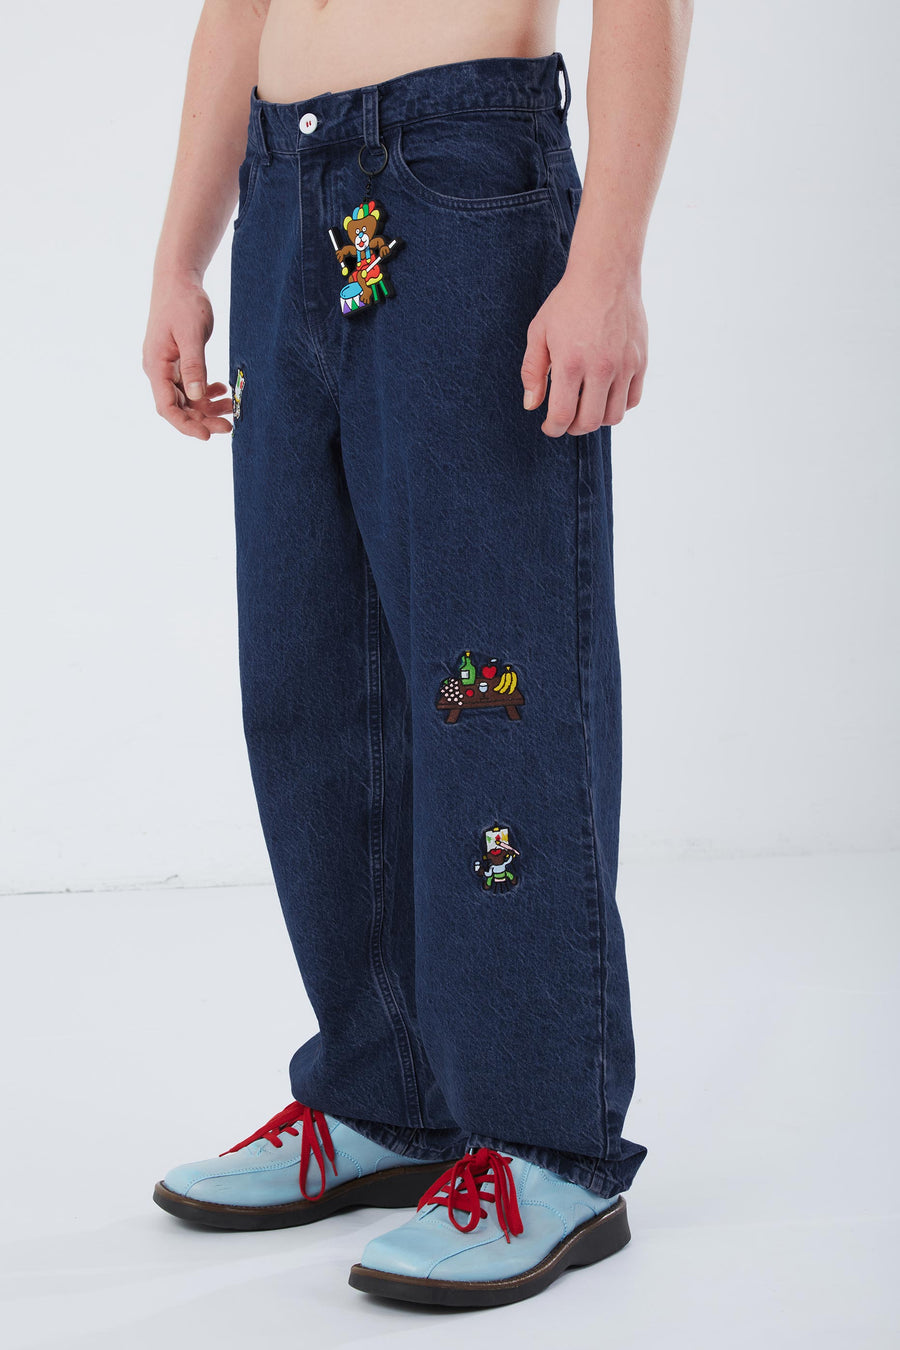 The Art Class trousers